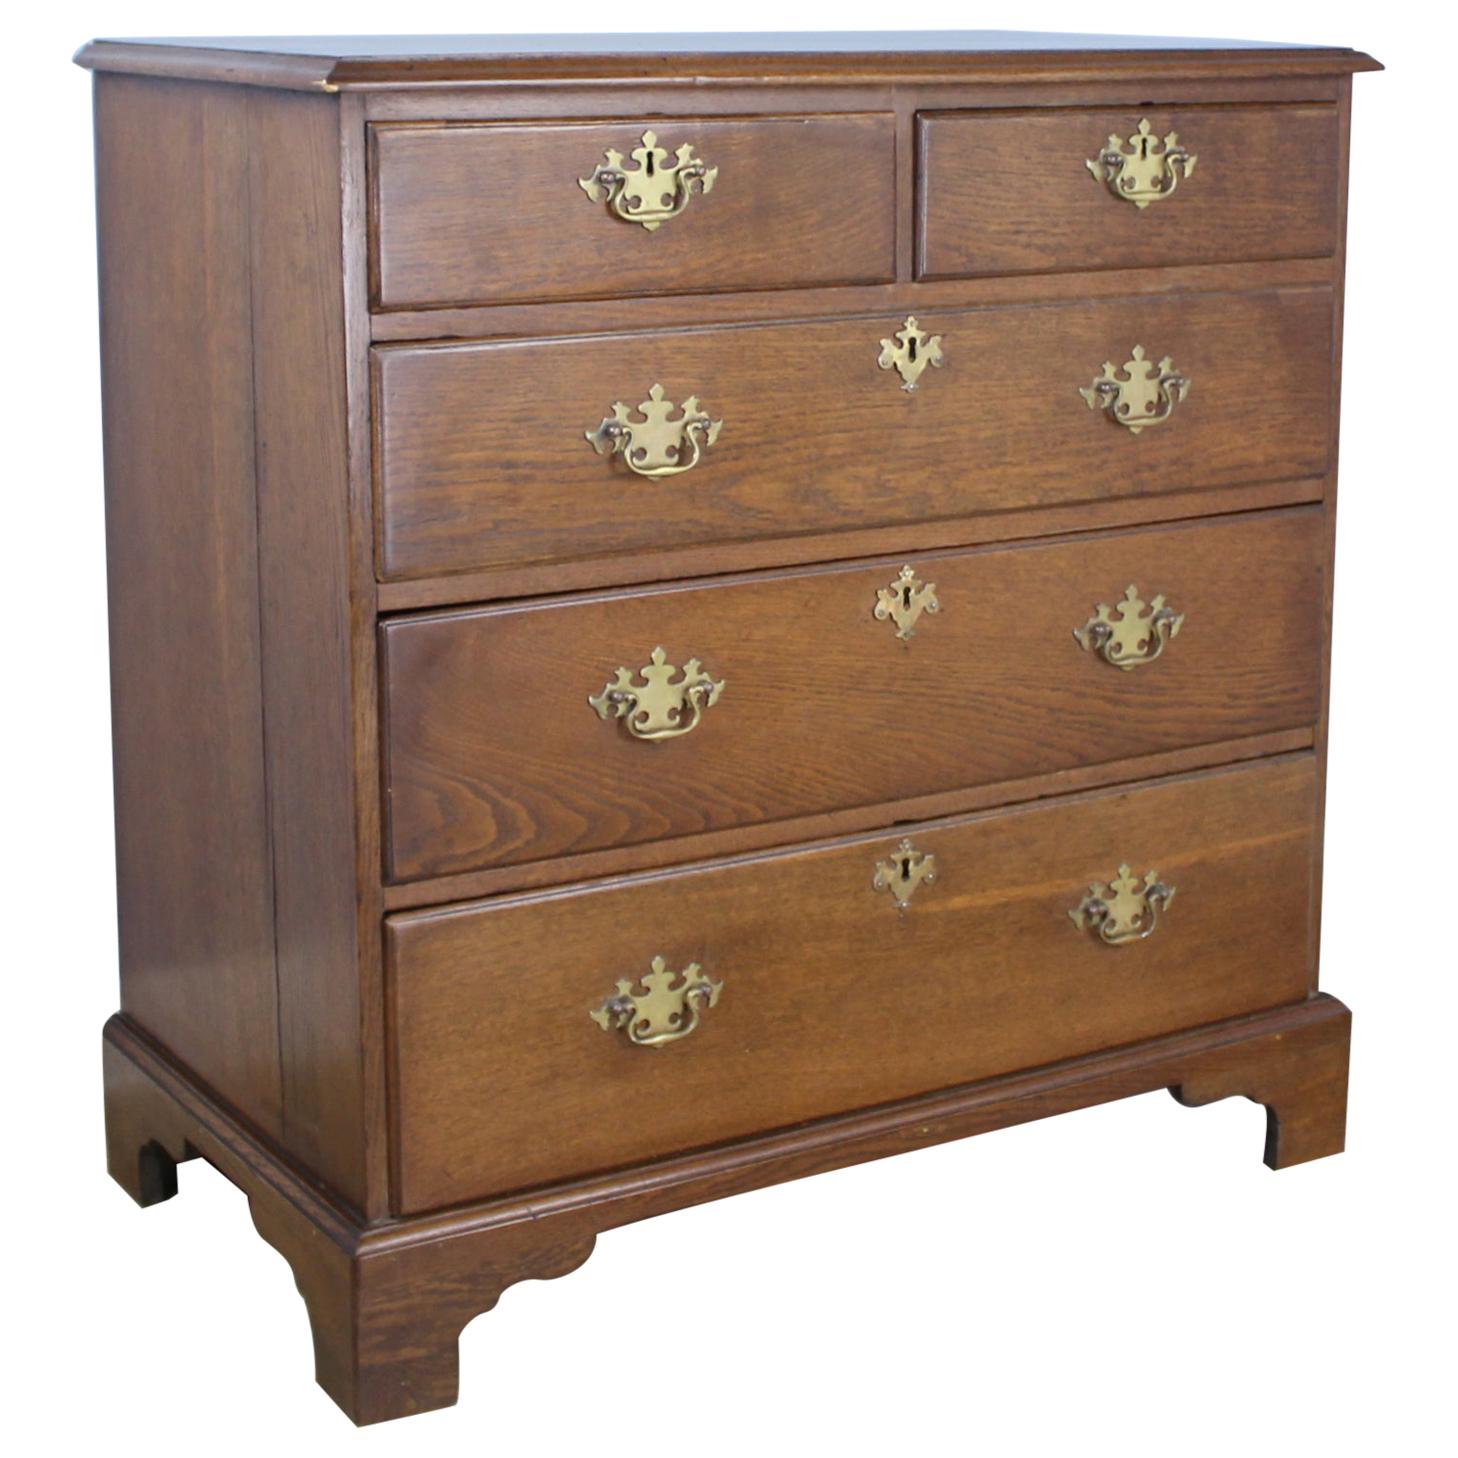 Period English Oak Chest of Drawers with Original Brasses For Sale